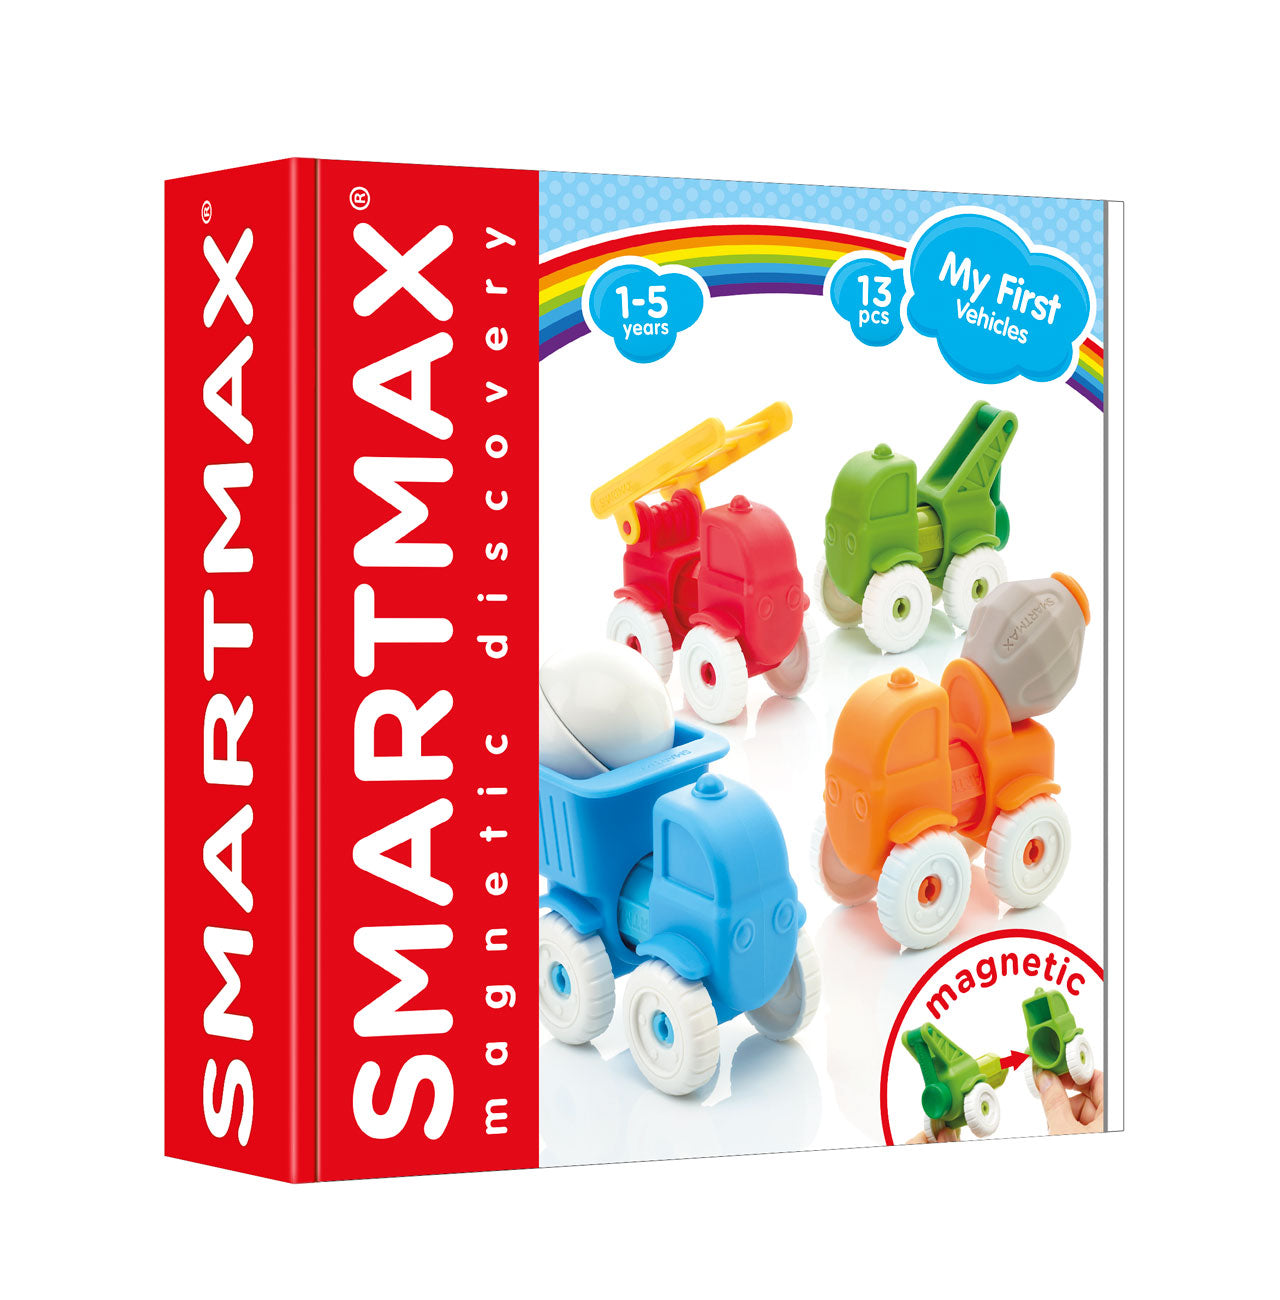 SMARTMAX BUILD & PLAY - THE TOY STORE